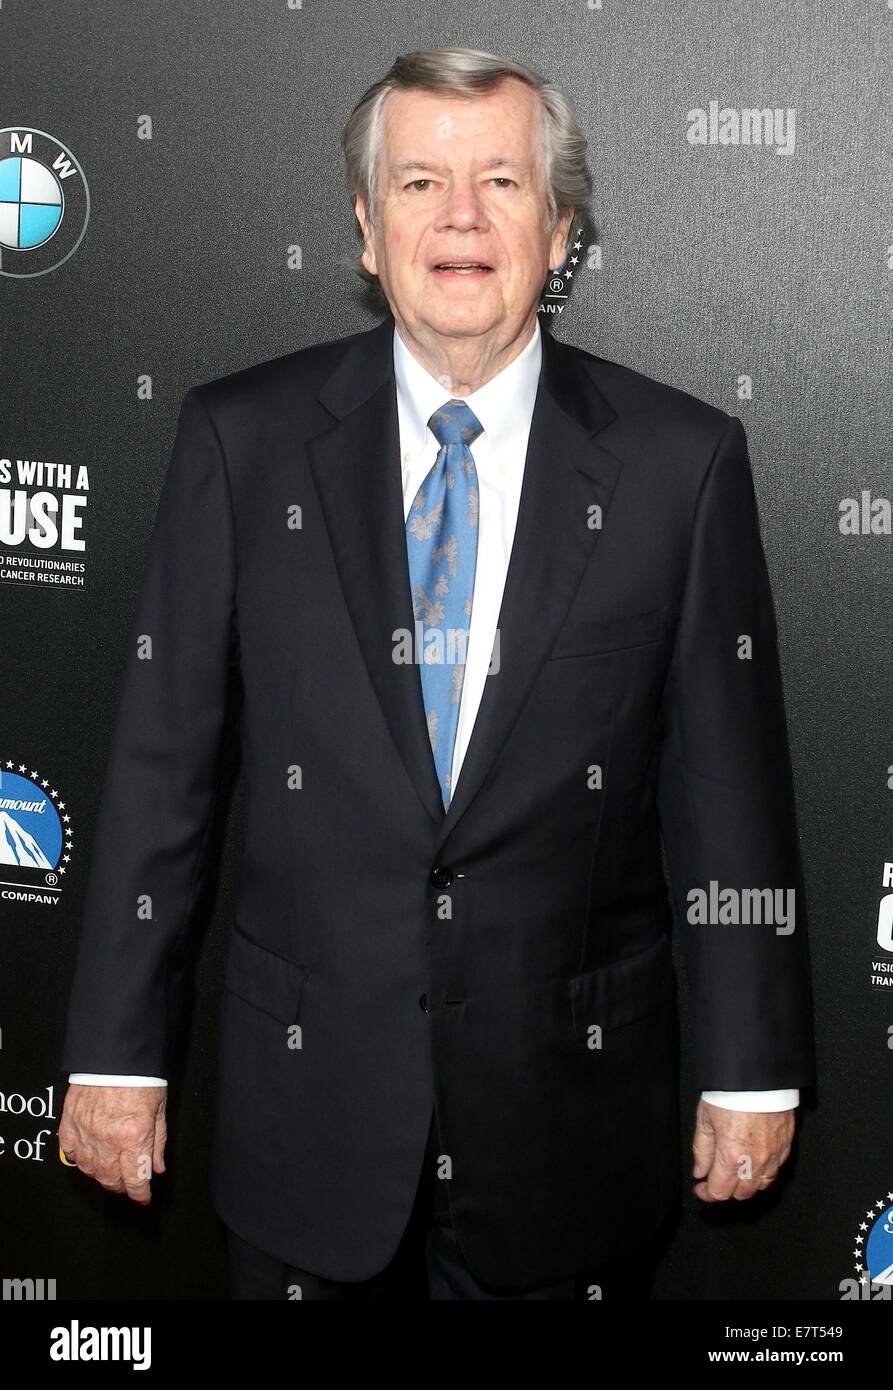 2nd Annual 'Rebels With A Cause' Gala honoring Larry Ellison at Paramount Pictures Studios - Arrivals  Featuring: Robert A. Daly Where: Hollywood, California, United States When: 20 Mar 2014 Stock Photo